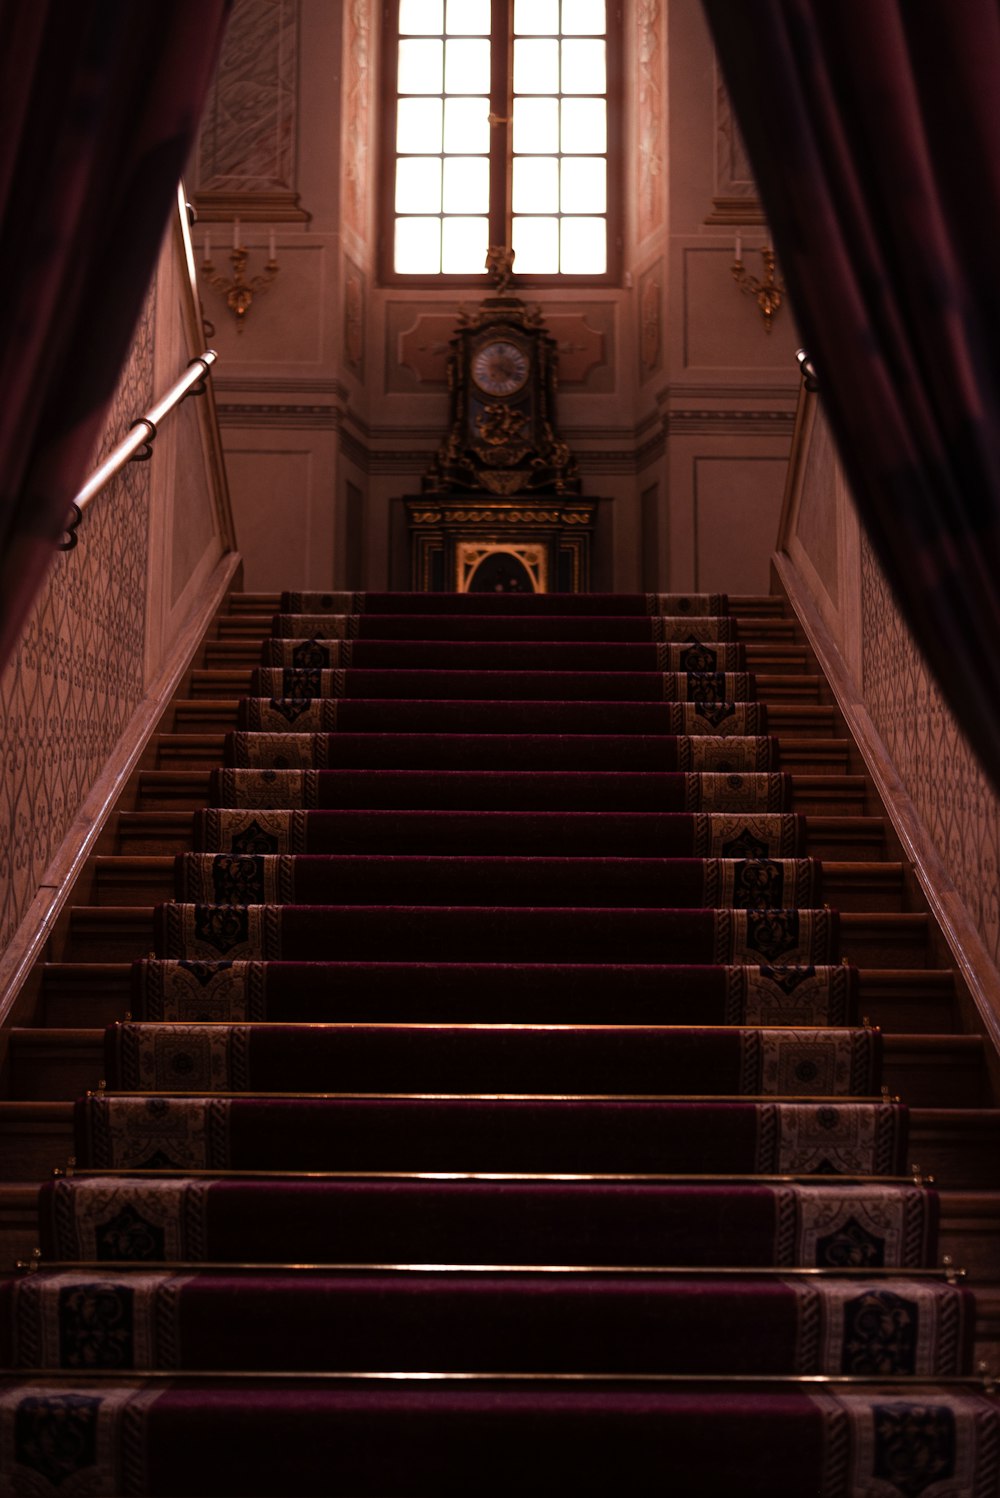 a staircase with a statue on the top